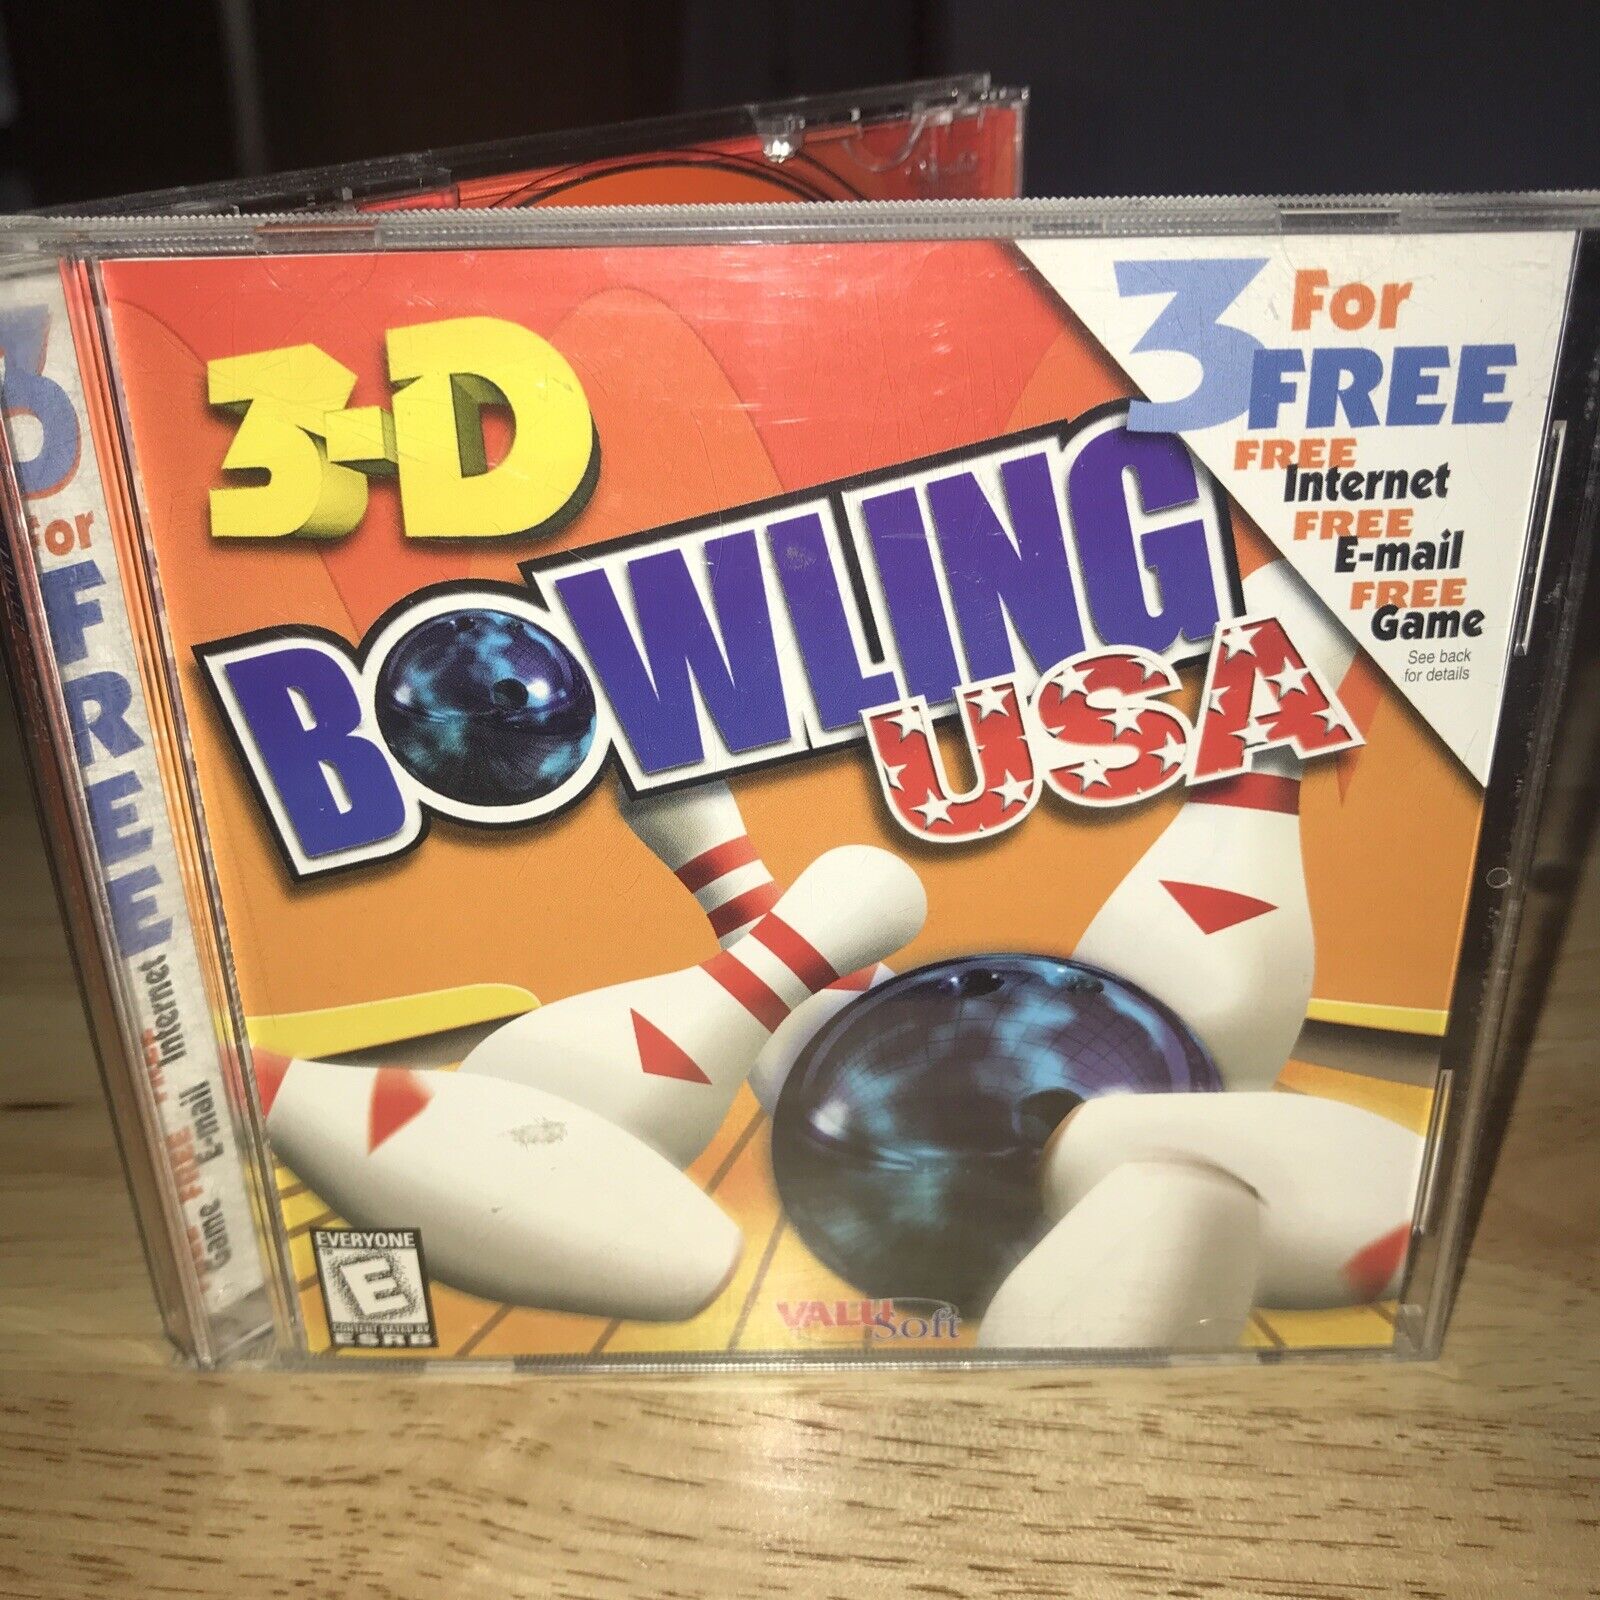 3-D Bowling USA (PC, 2000) for sale online eBay